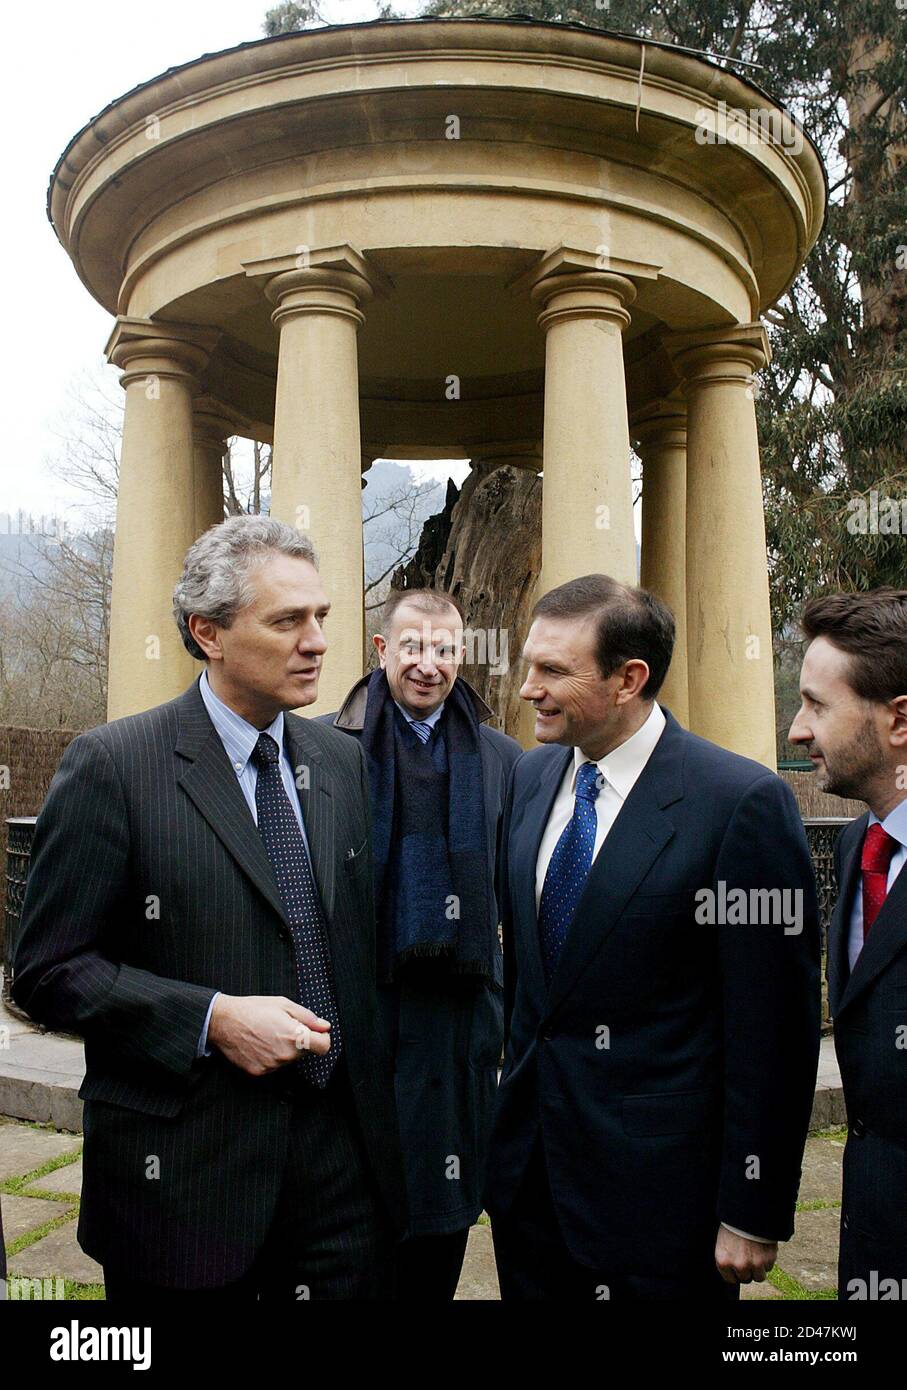 Francisco Rutelli, president of the European Democratic Party (EDP) and former mayor of Rome (L) talks to Basque premier Juan Jose Ibarretxe (R) in front of the Oak of Gernika, symbol of Basque liberties, in Gernika, northern Spain, February 6, 2005. Representatives of the EDP met with members of the ruling Basque Nationalist Party (PNV) to campaign for a positive vote on the referendum for the European Union Constitution, to be held in Spain on February 20. REUTERS/ Vincent West  VPW/SV Stock Photo